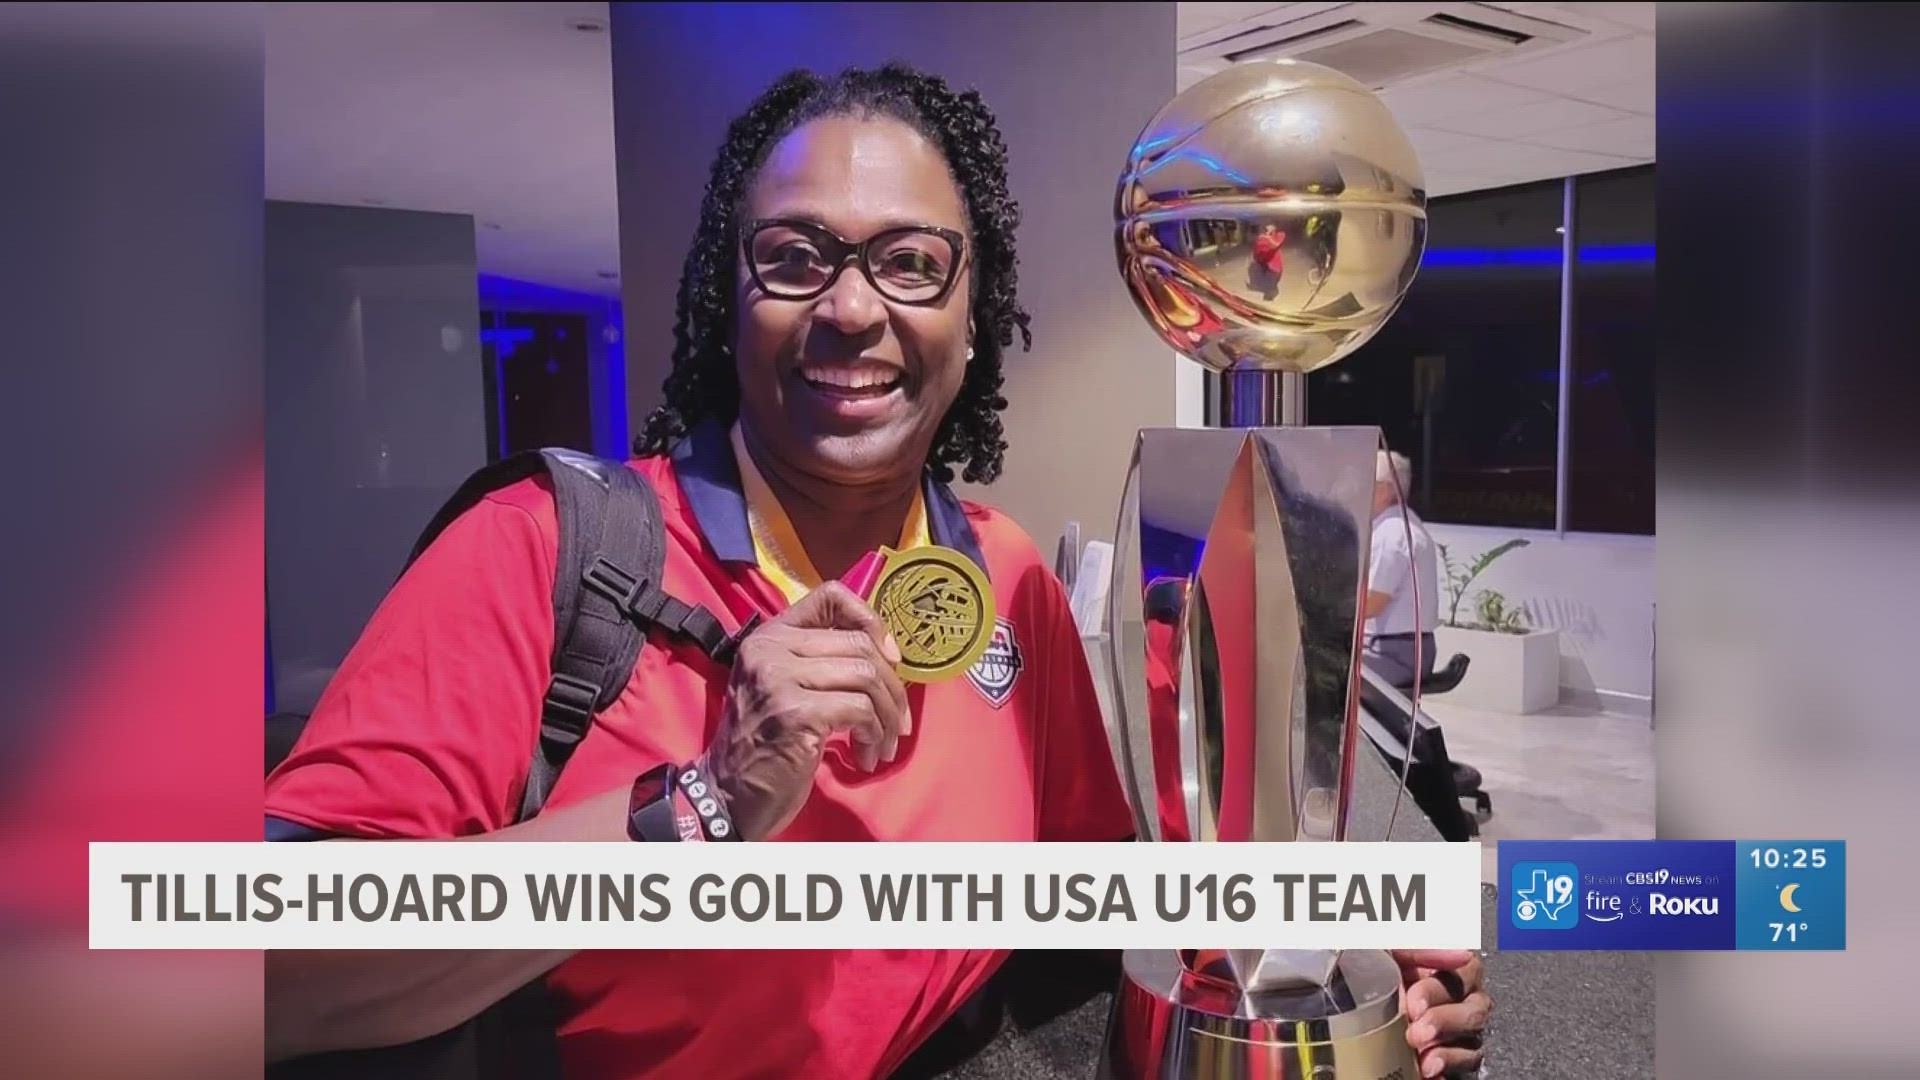 After being named assistant coach to USA Basketball's U16 team, coach Tillis-Hoard has brought home gold.